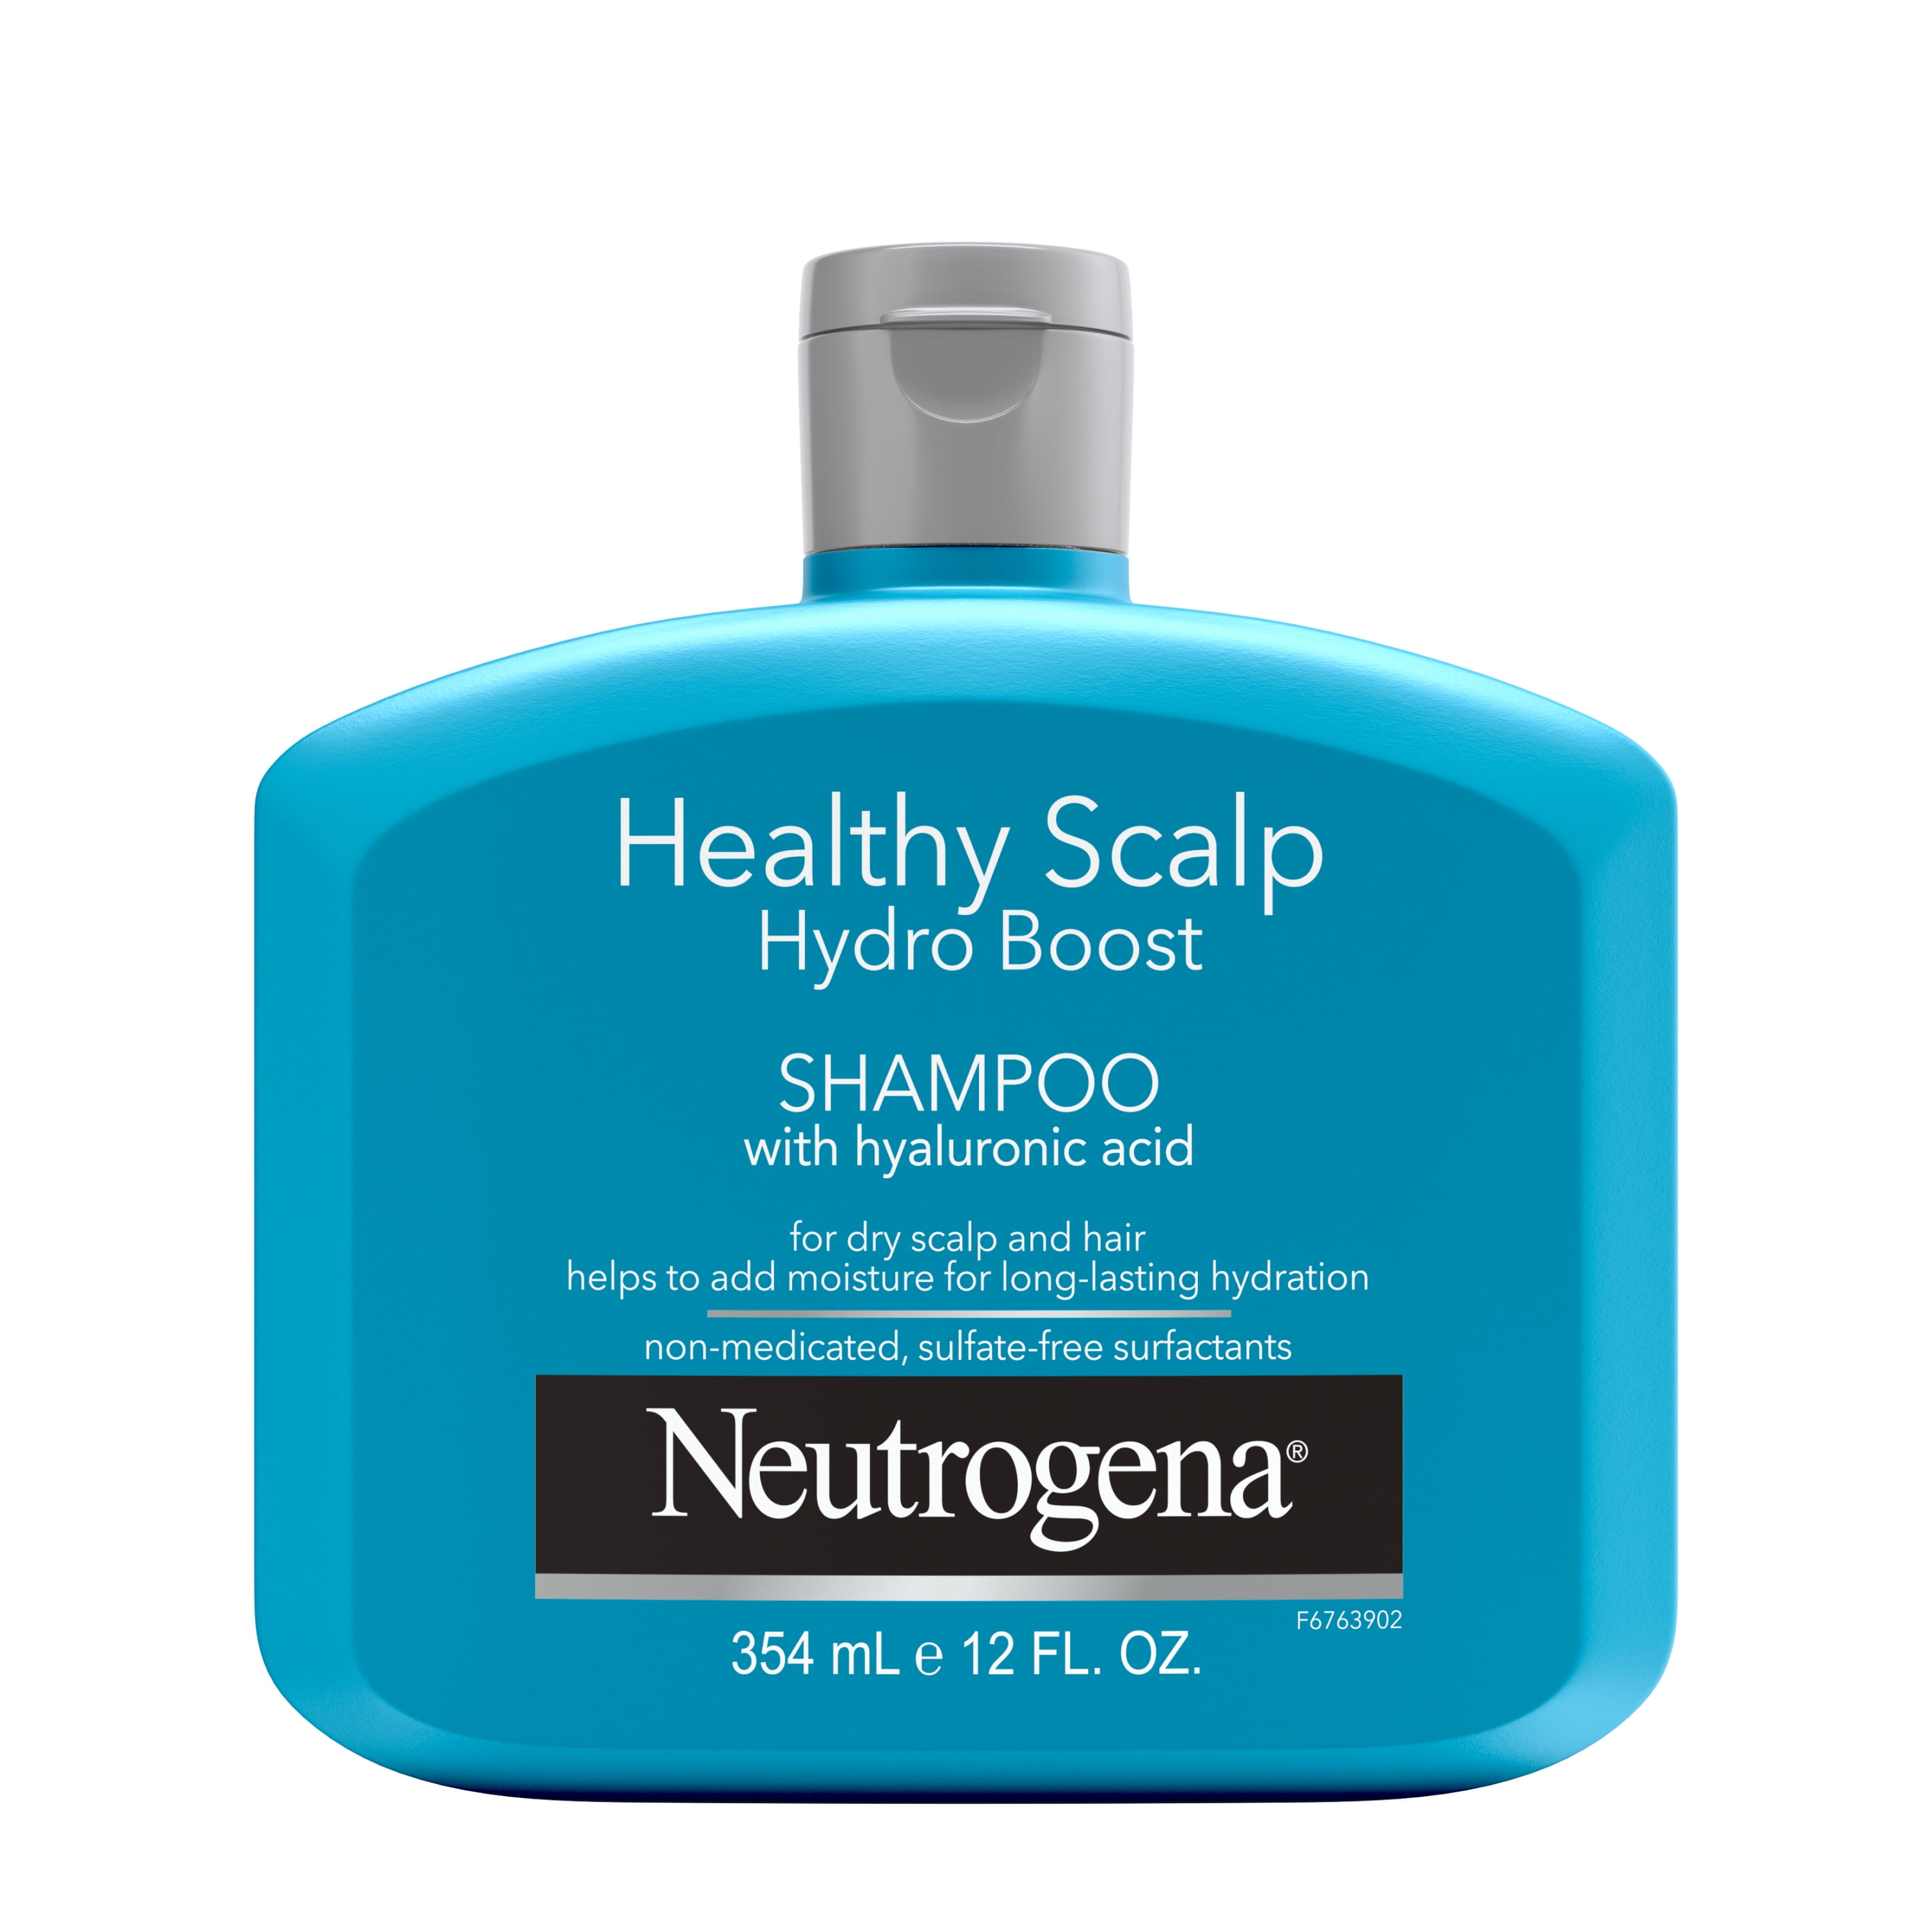 Neutrogena Hydrating Shampoo for Dry Scalp & Hair with Hyaluronic Acid, Healthy Scalp Hydro Boost, Sulfate-Free Surfactants, Color-Safe, 12 fl oz